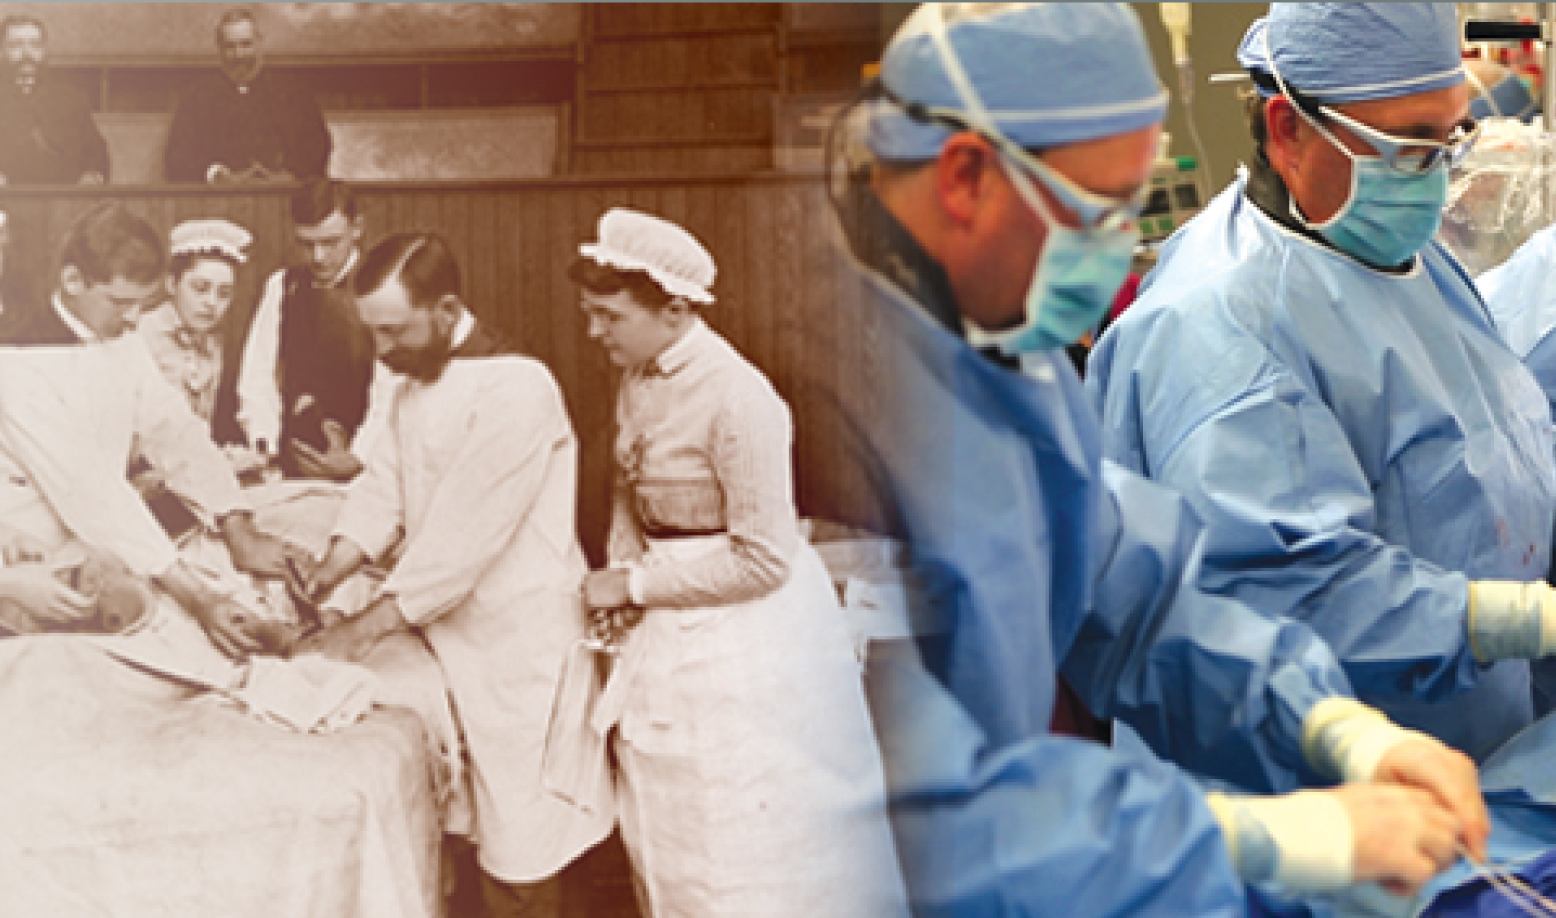 Collage of older medical photos and current doctors working on a patient